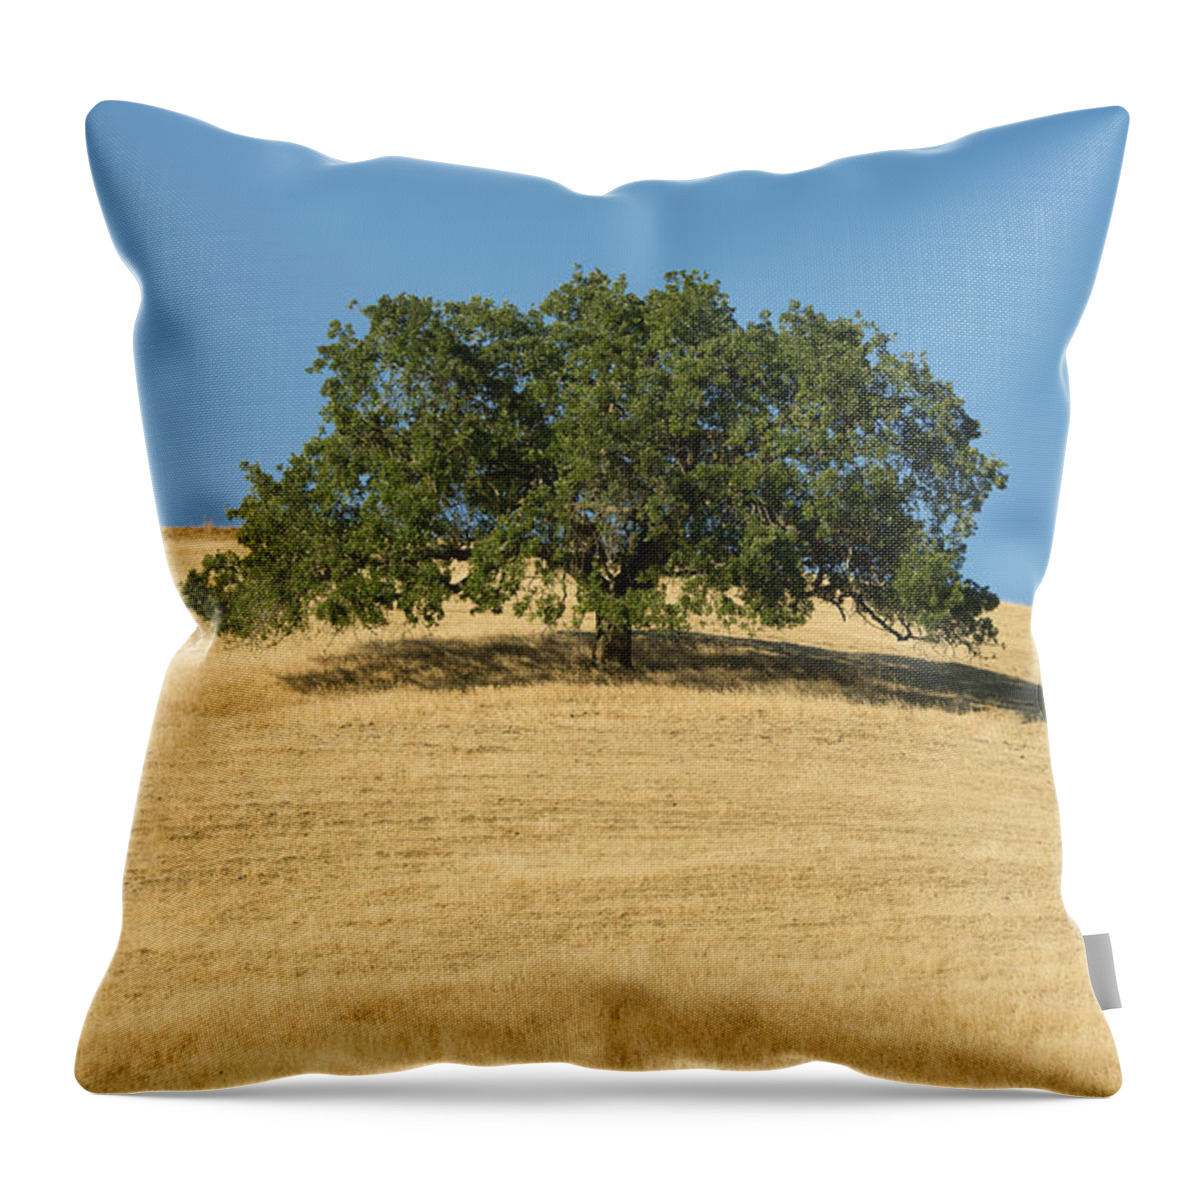 538012 Throw Pillow featuring the photograph Oak Tree Mount Diablo State Park by Kevin Schafer